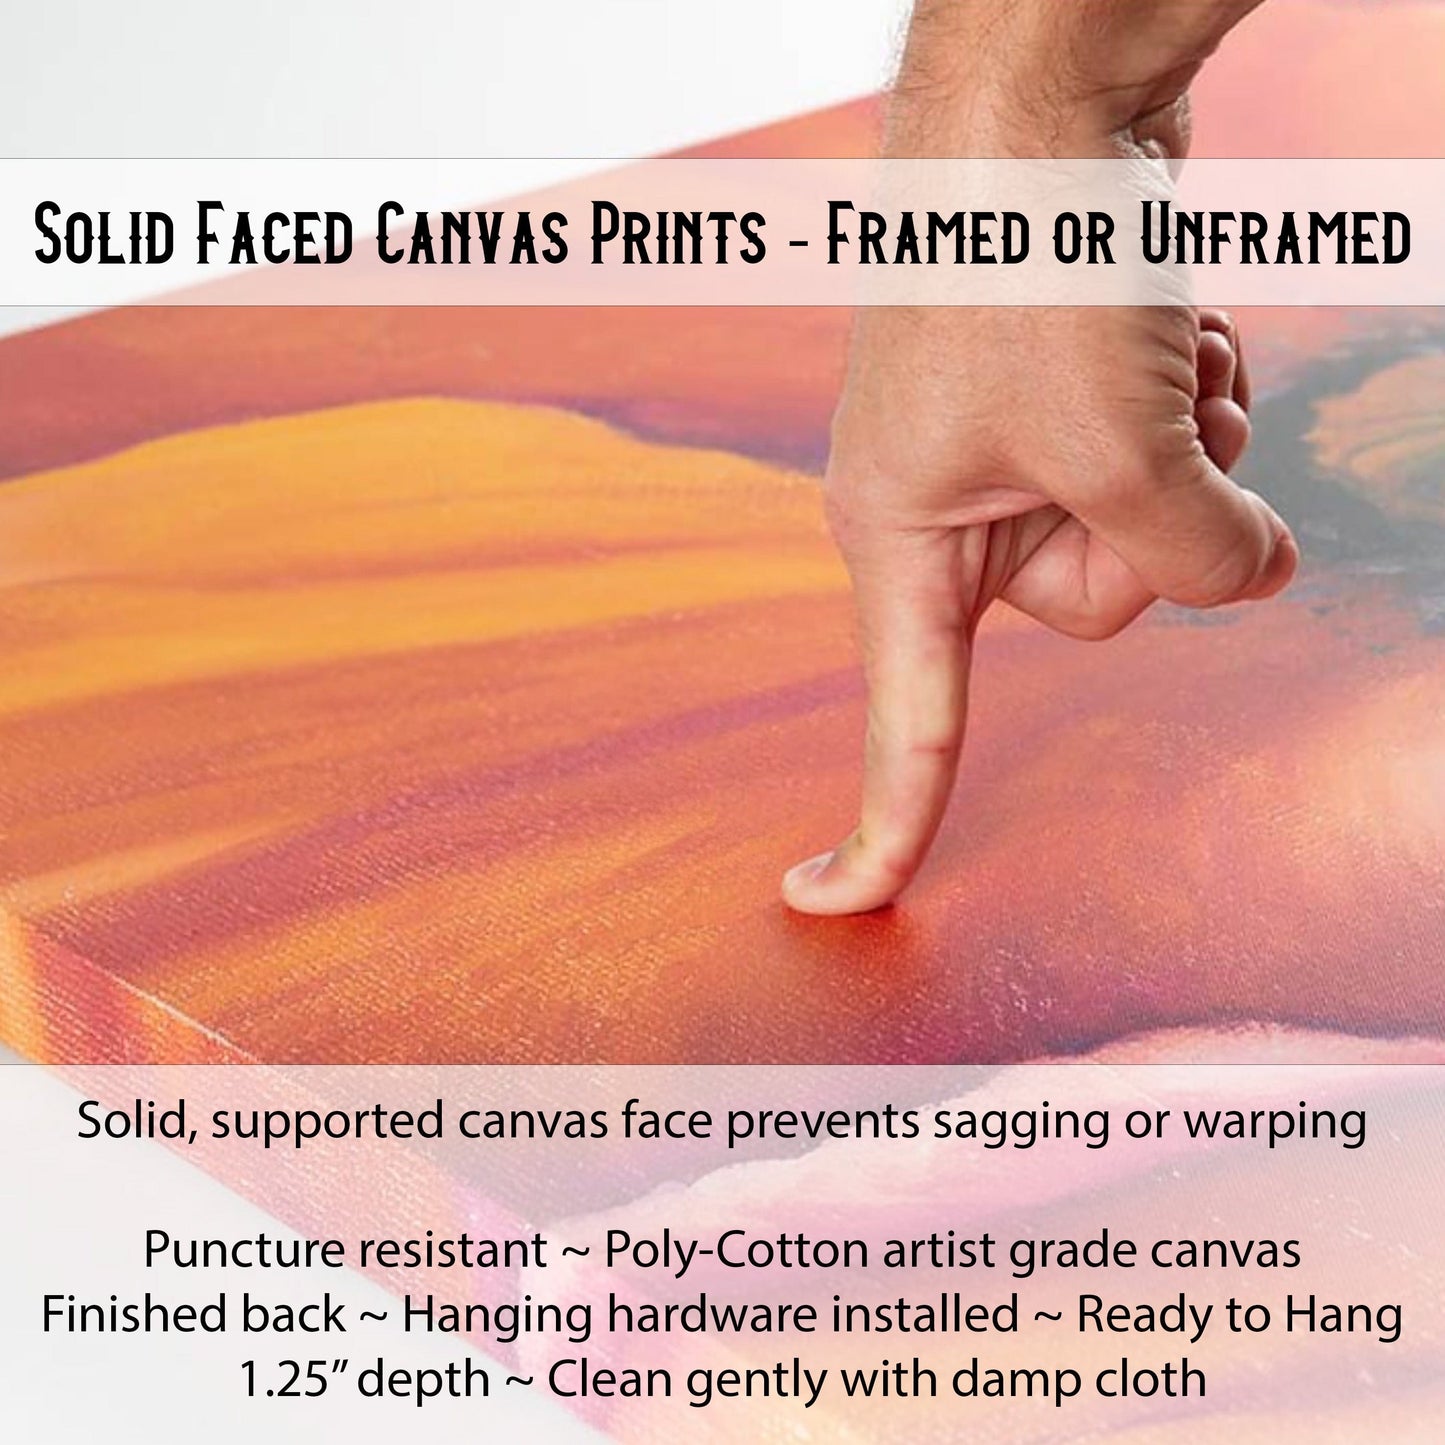 solid faced canvas info